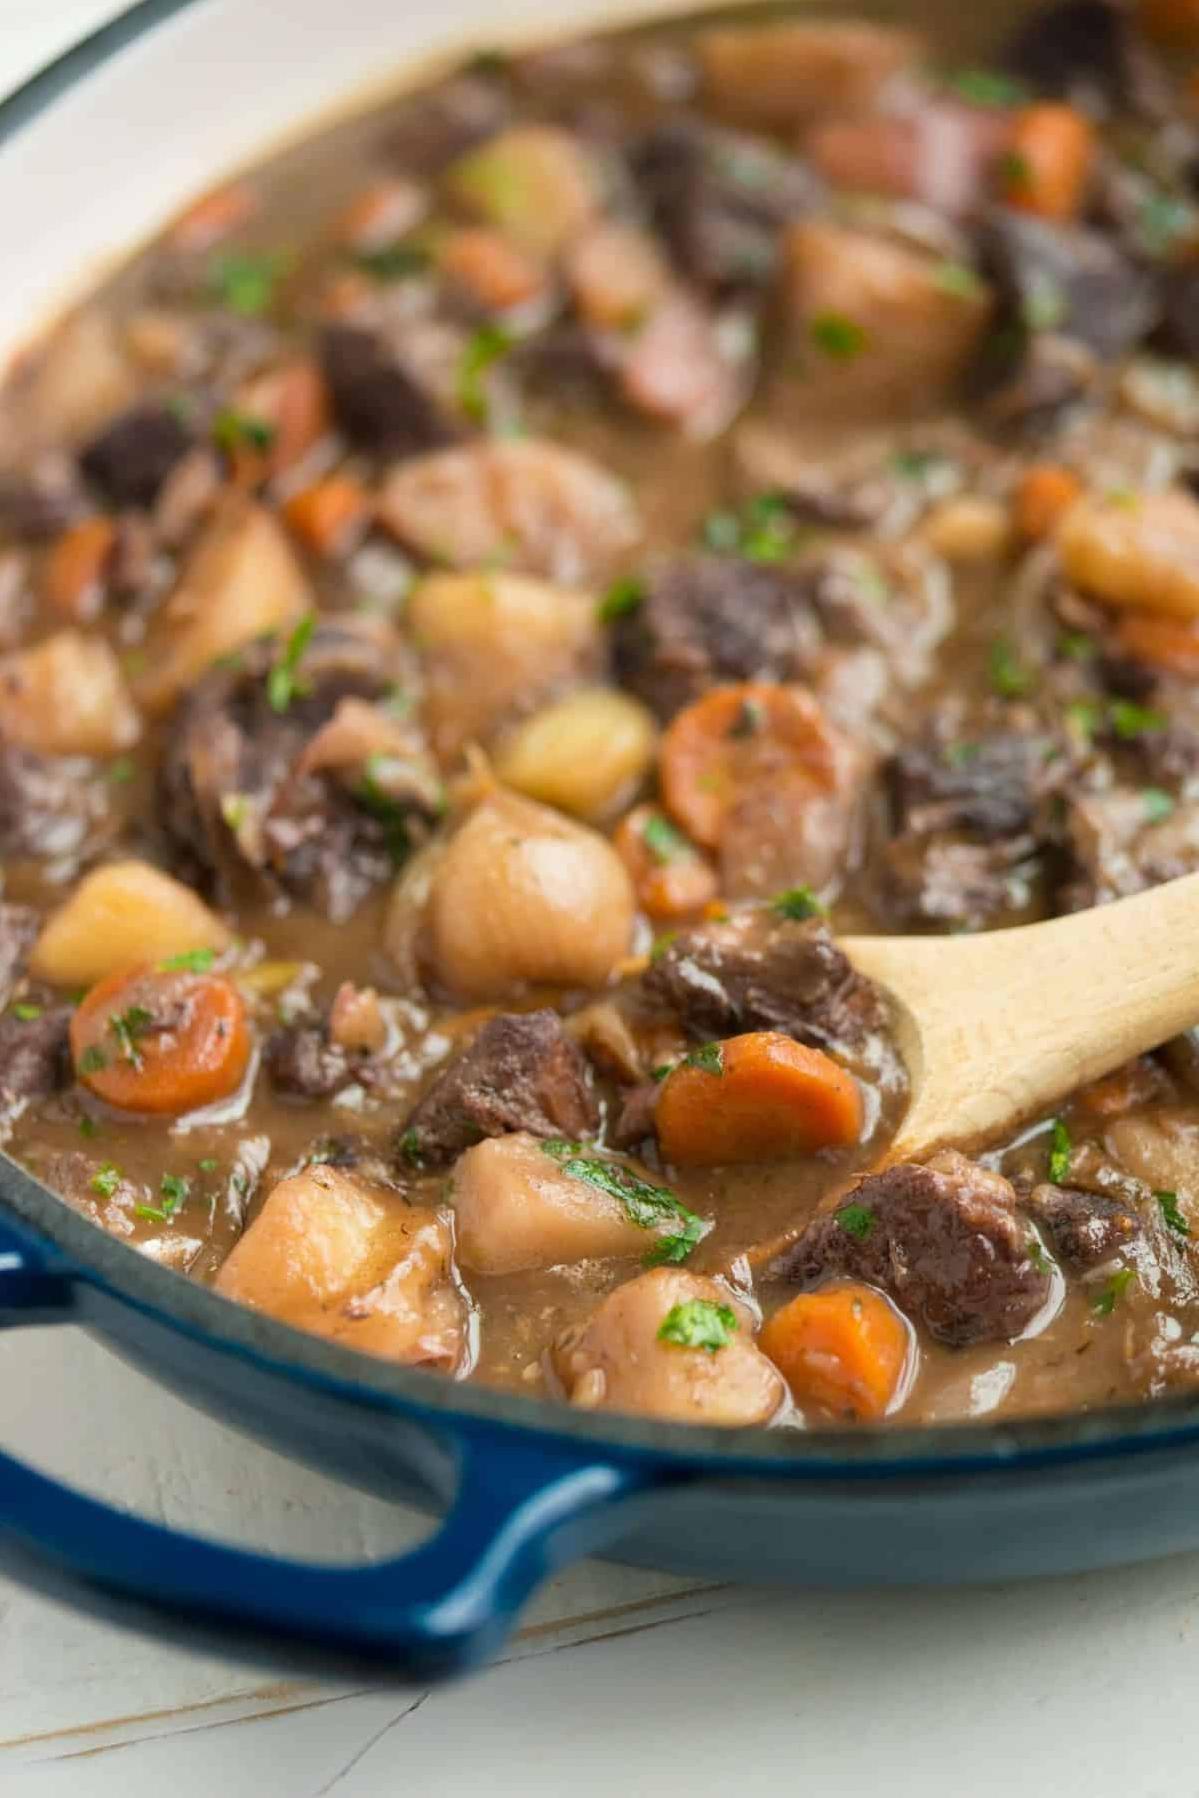  Whether you're Irish or not, this stew is sure to make you feel lucky